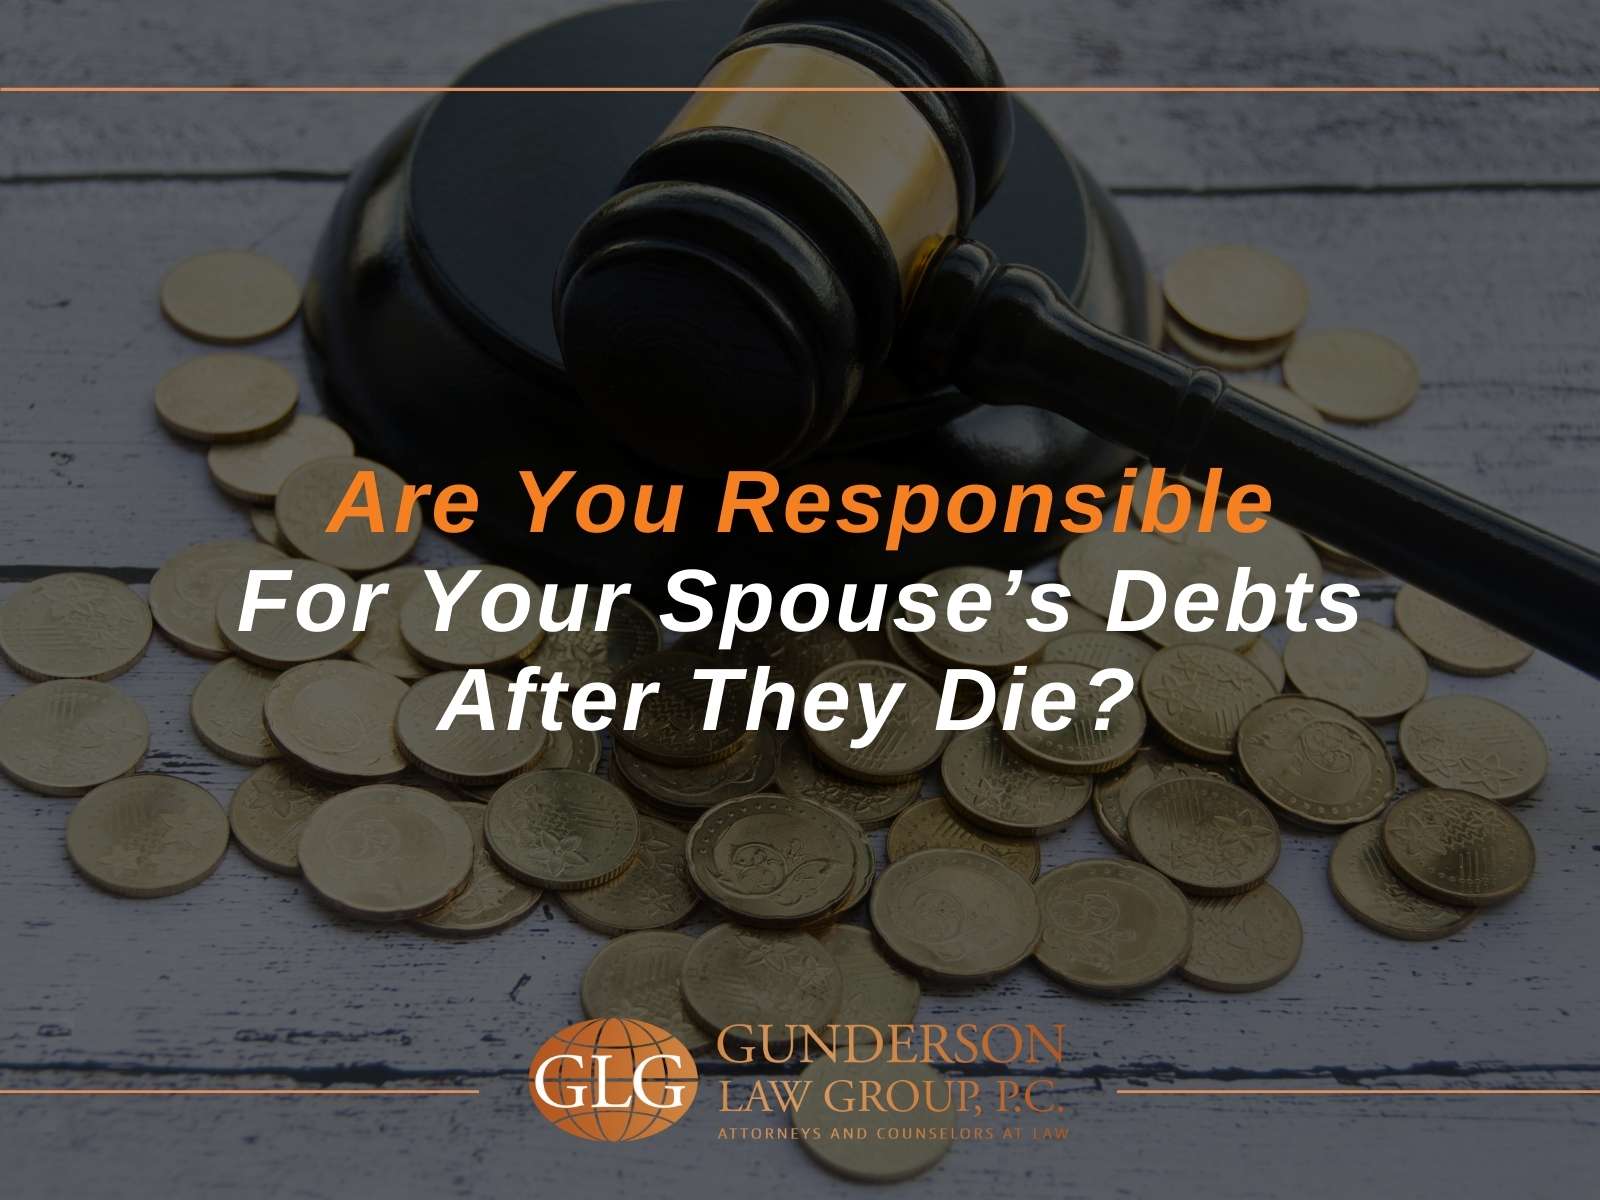 Dealing with spouse’s debts with an estate administration attorney